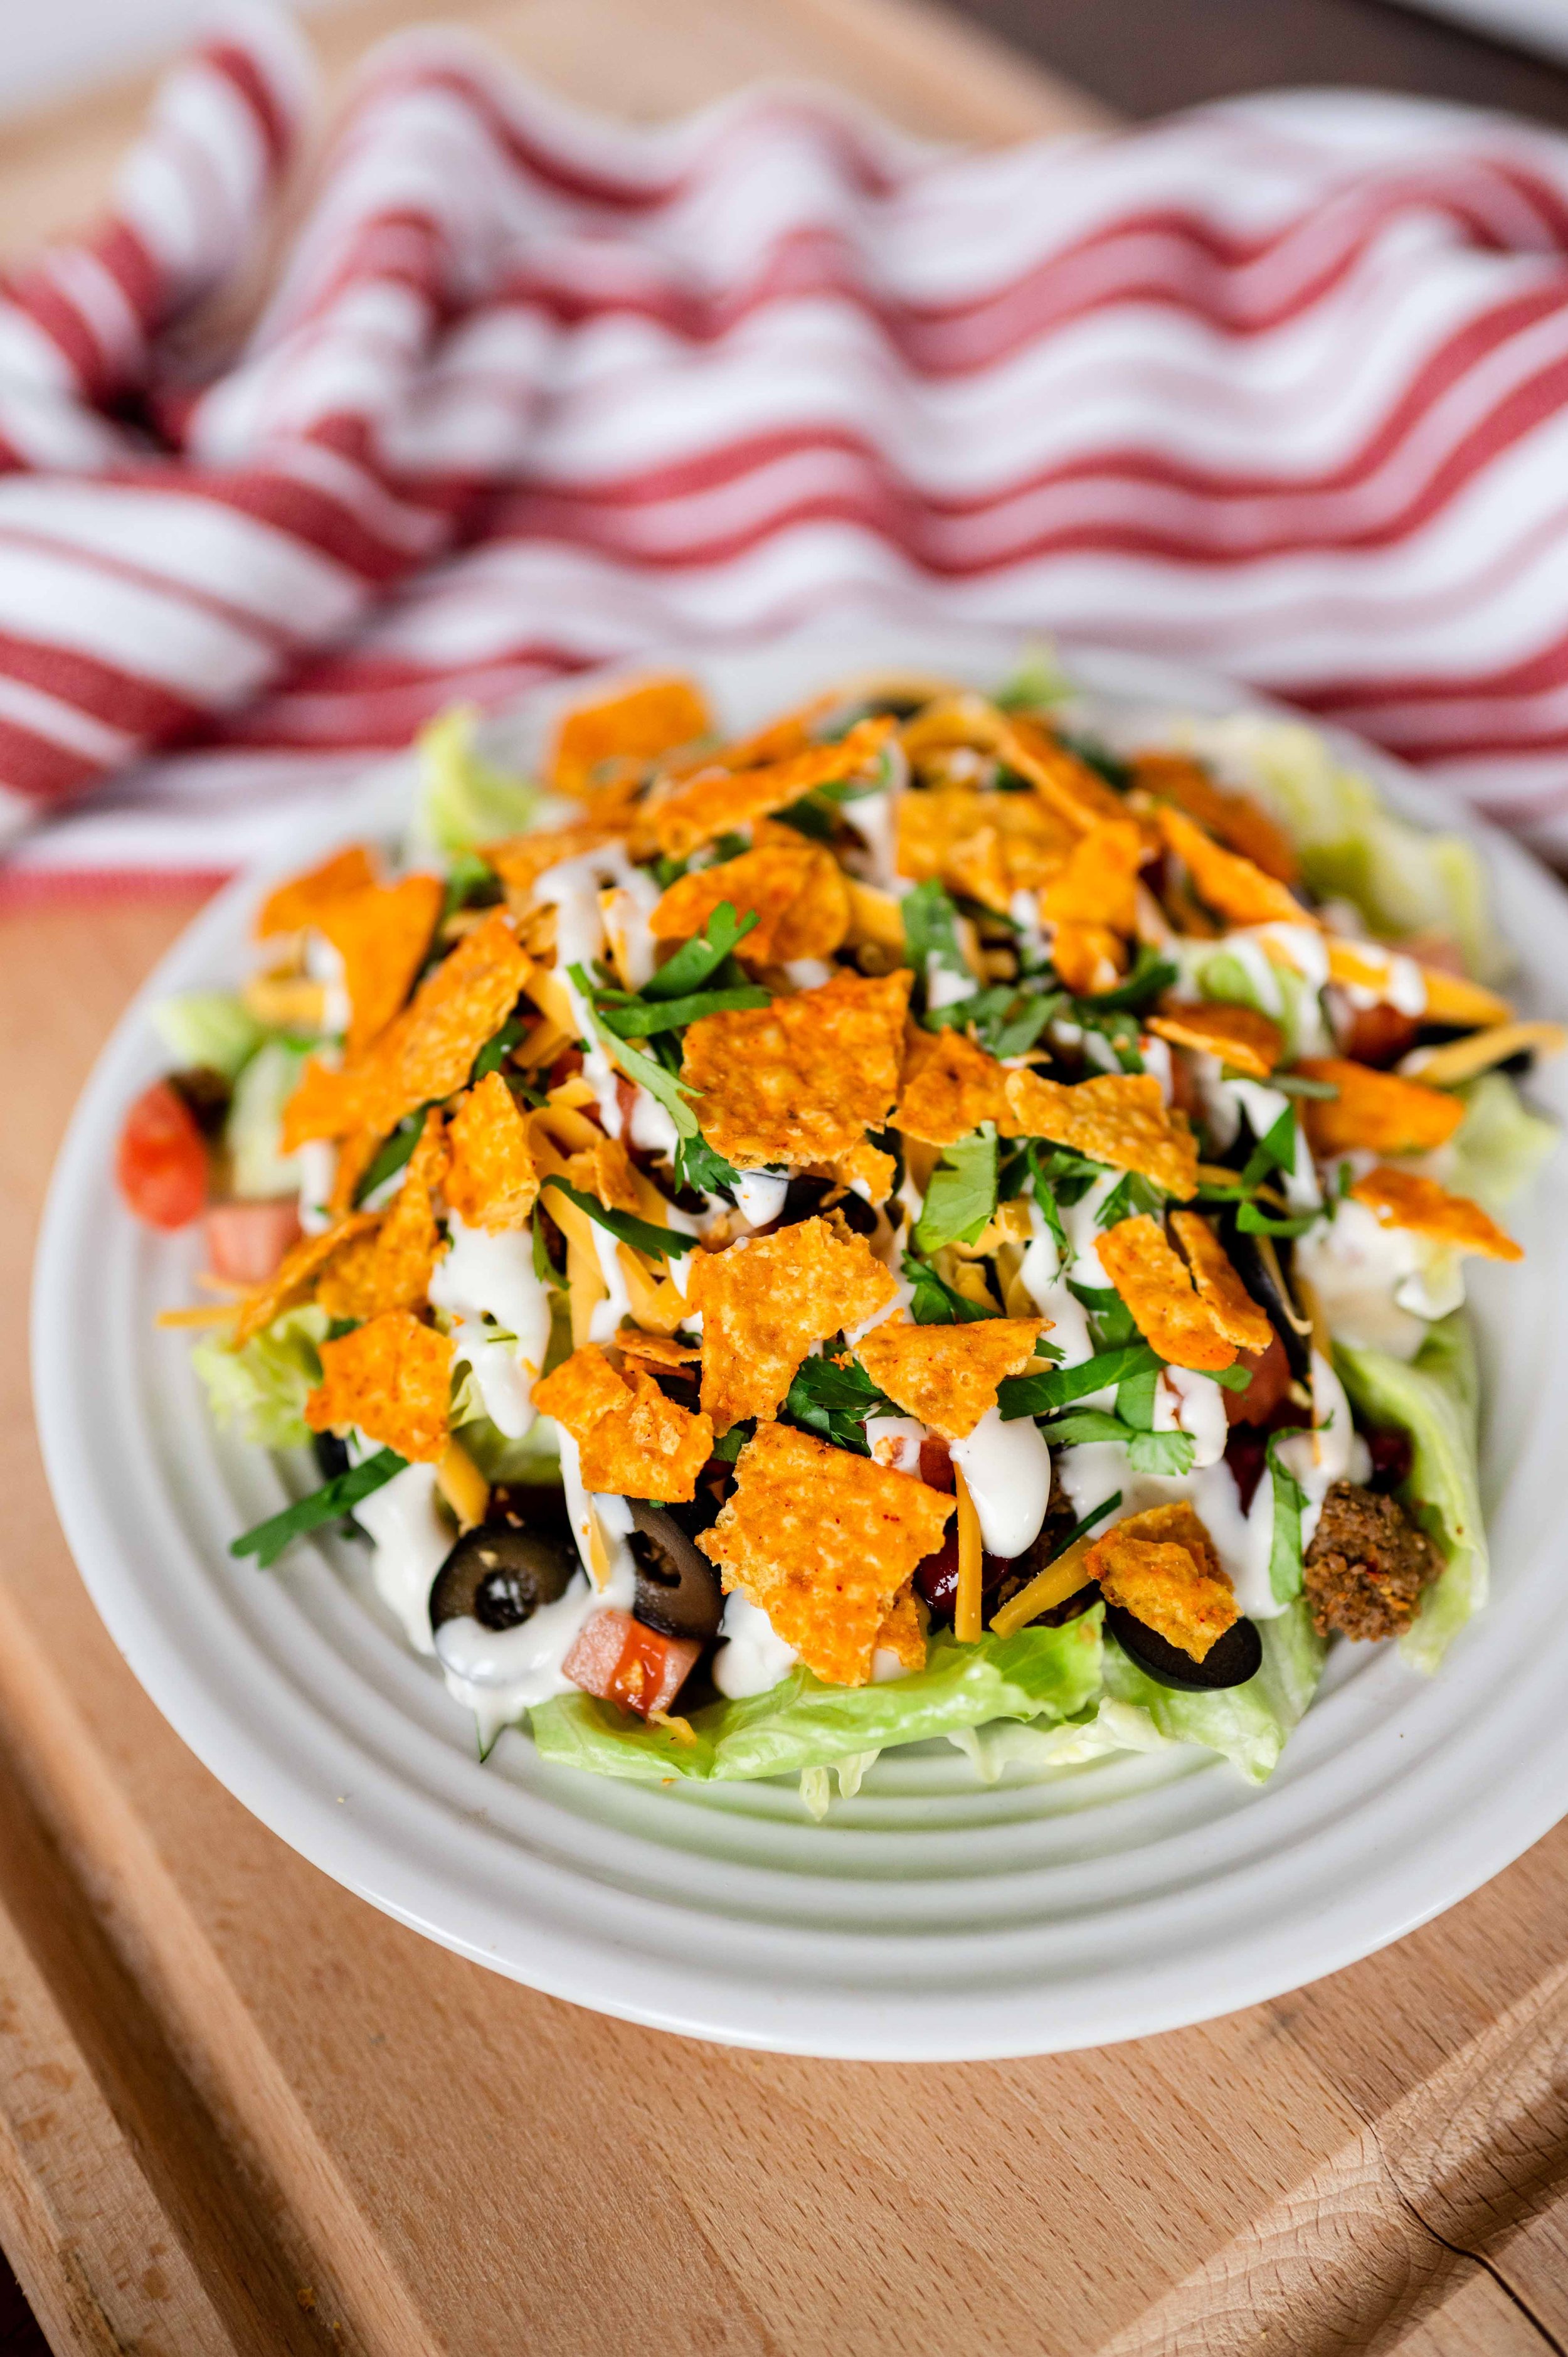 Easy Family Dinner Taco Salad with Doritos - Weeknight Dinner - Healthy &amp; Filling Family Dinner - Taco Salad Recipe - Budget Friendly Affordable Dinner - Morgan Tayler Food for Families